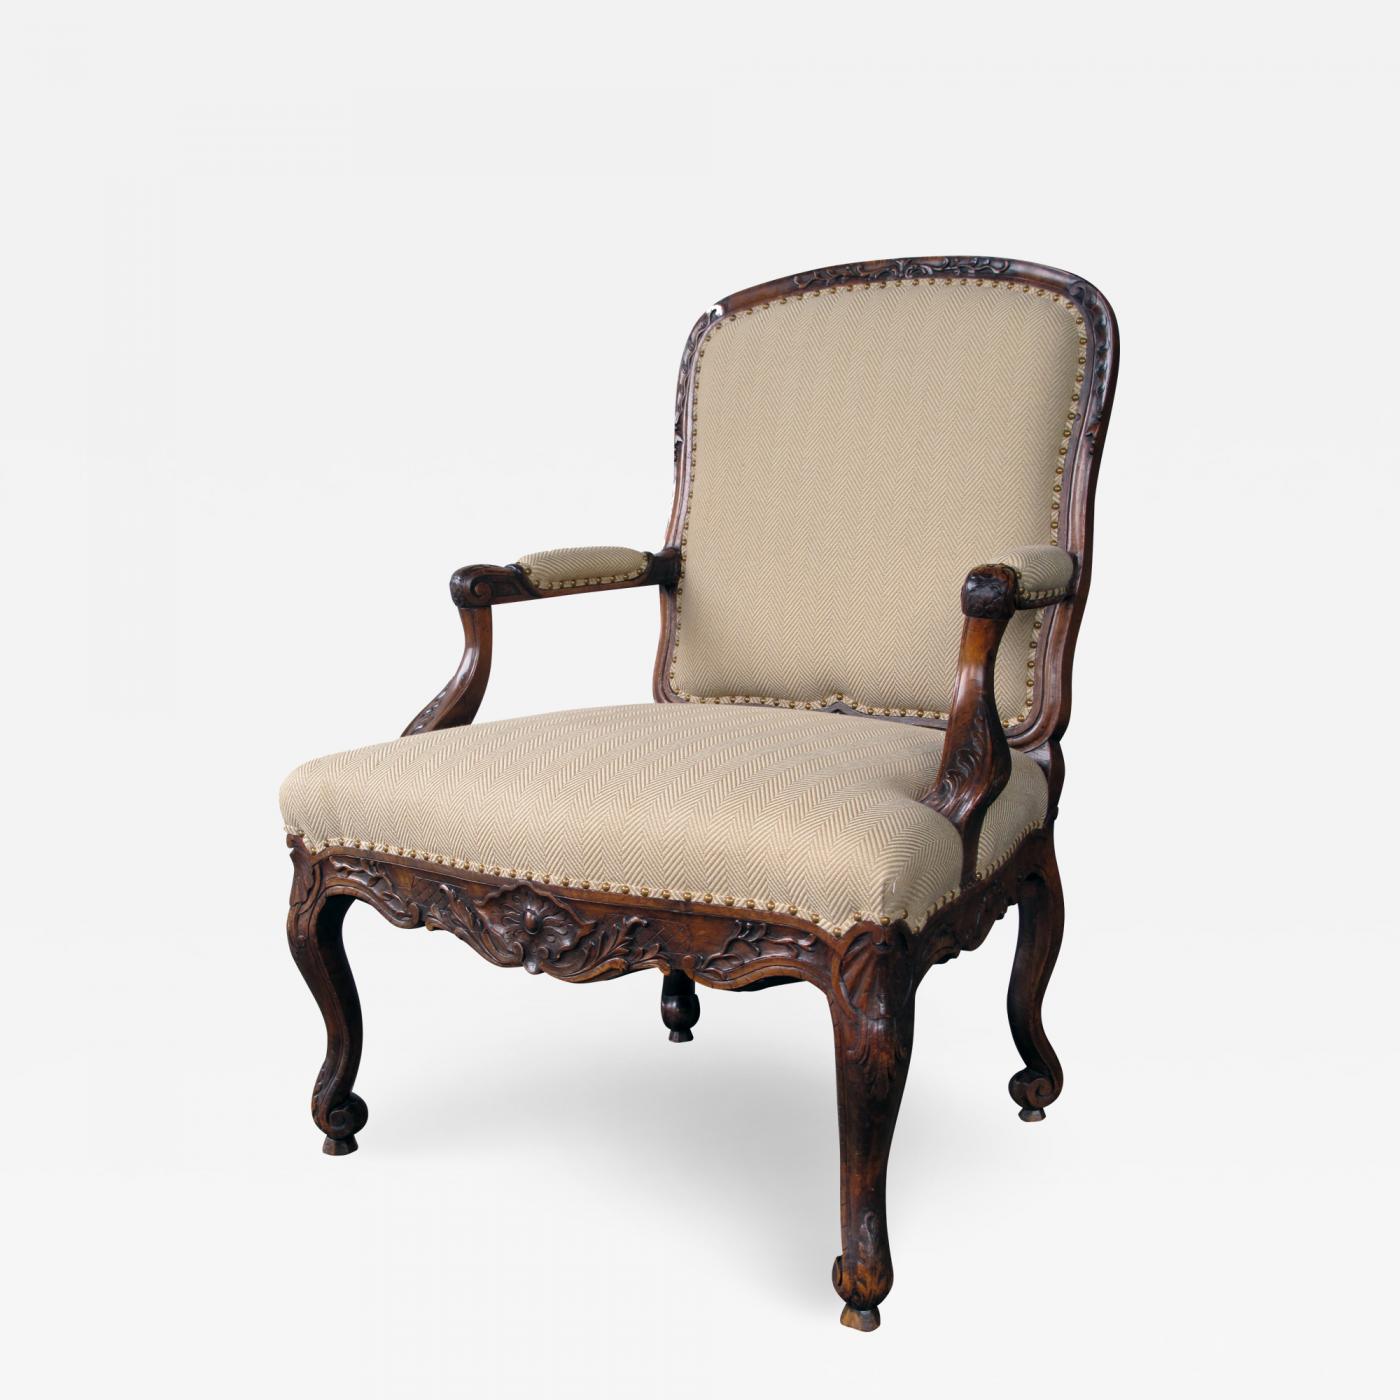 Vasacrafts Company Incorporated  Home — 2329. Lounge chair in Rococo style